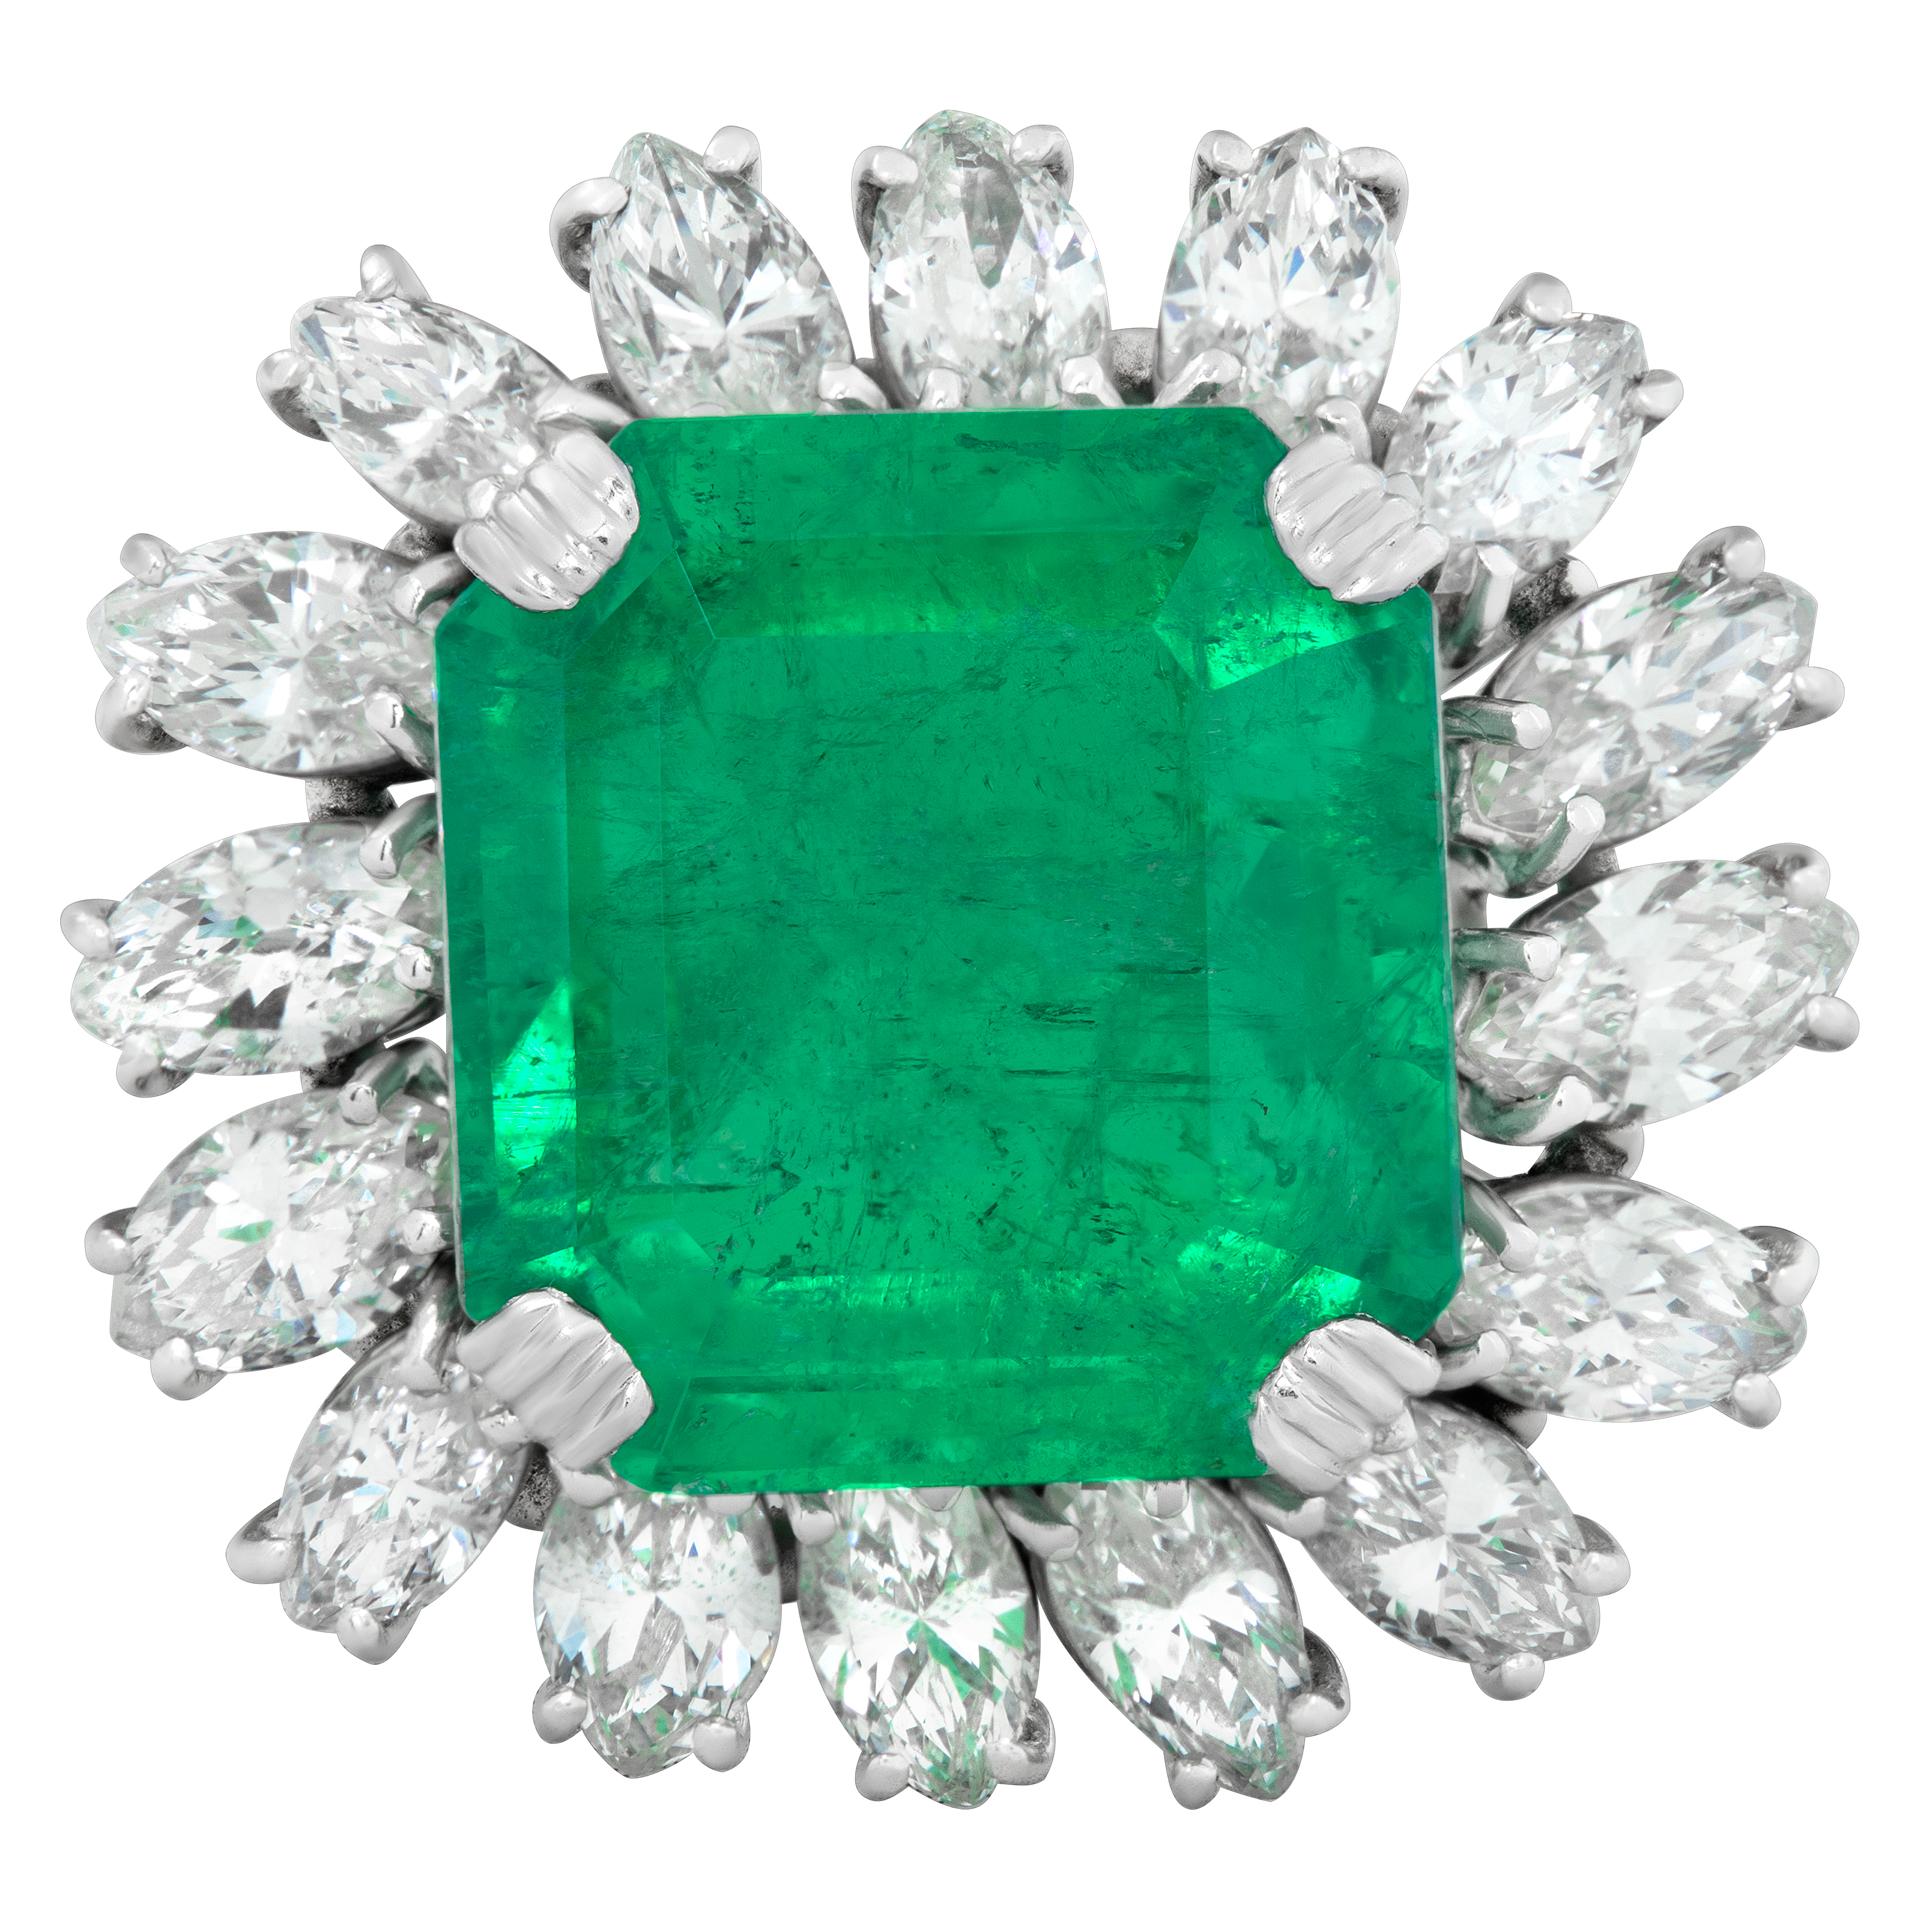 AGL certified over 8 carat Colombian emerald ring in a platinum setting with over 3 carats in G-H color VS-SI clarity marquise diamonds. Size 8.This Diamond/Emerald ring is currently size 8 and some items can be sized up or down, please ask! It